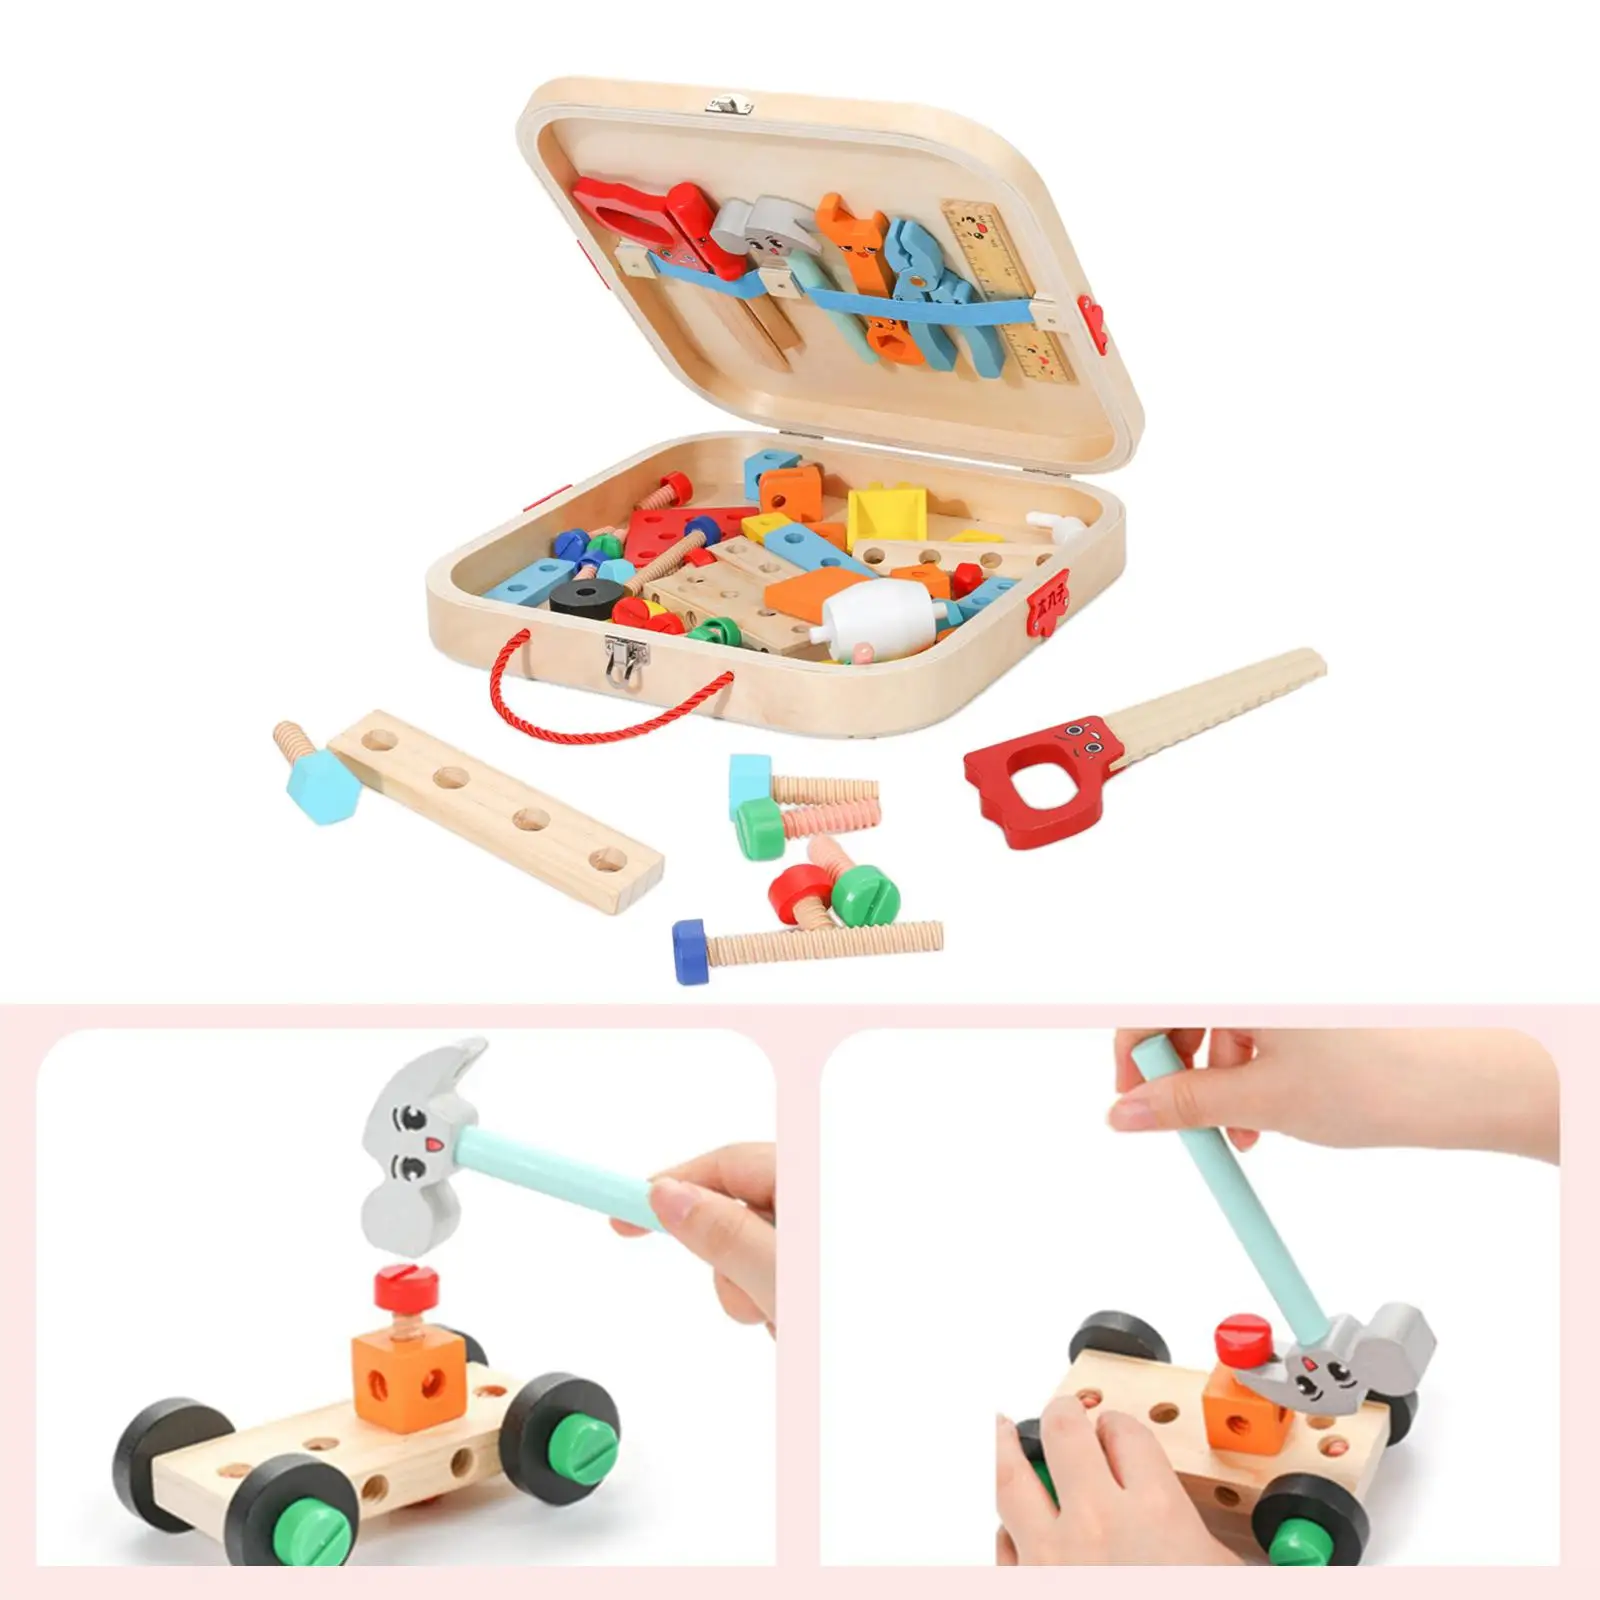 Kids Tool Set Wooden Tools Box Pretend Toy Toddlers Wooden Tool Toy with Tools Box for Birthday Gift DIY Living Room